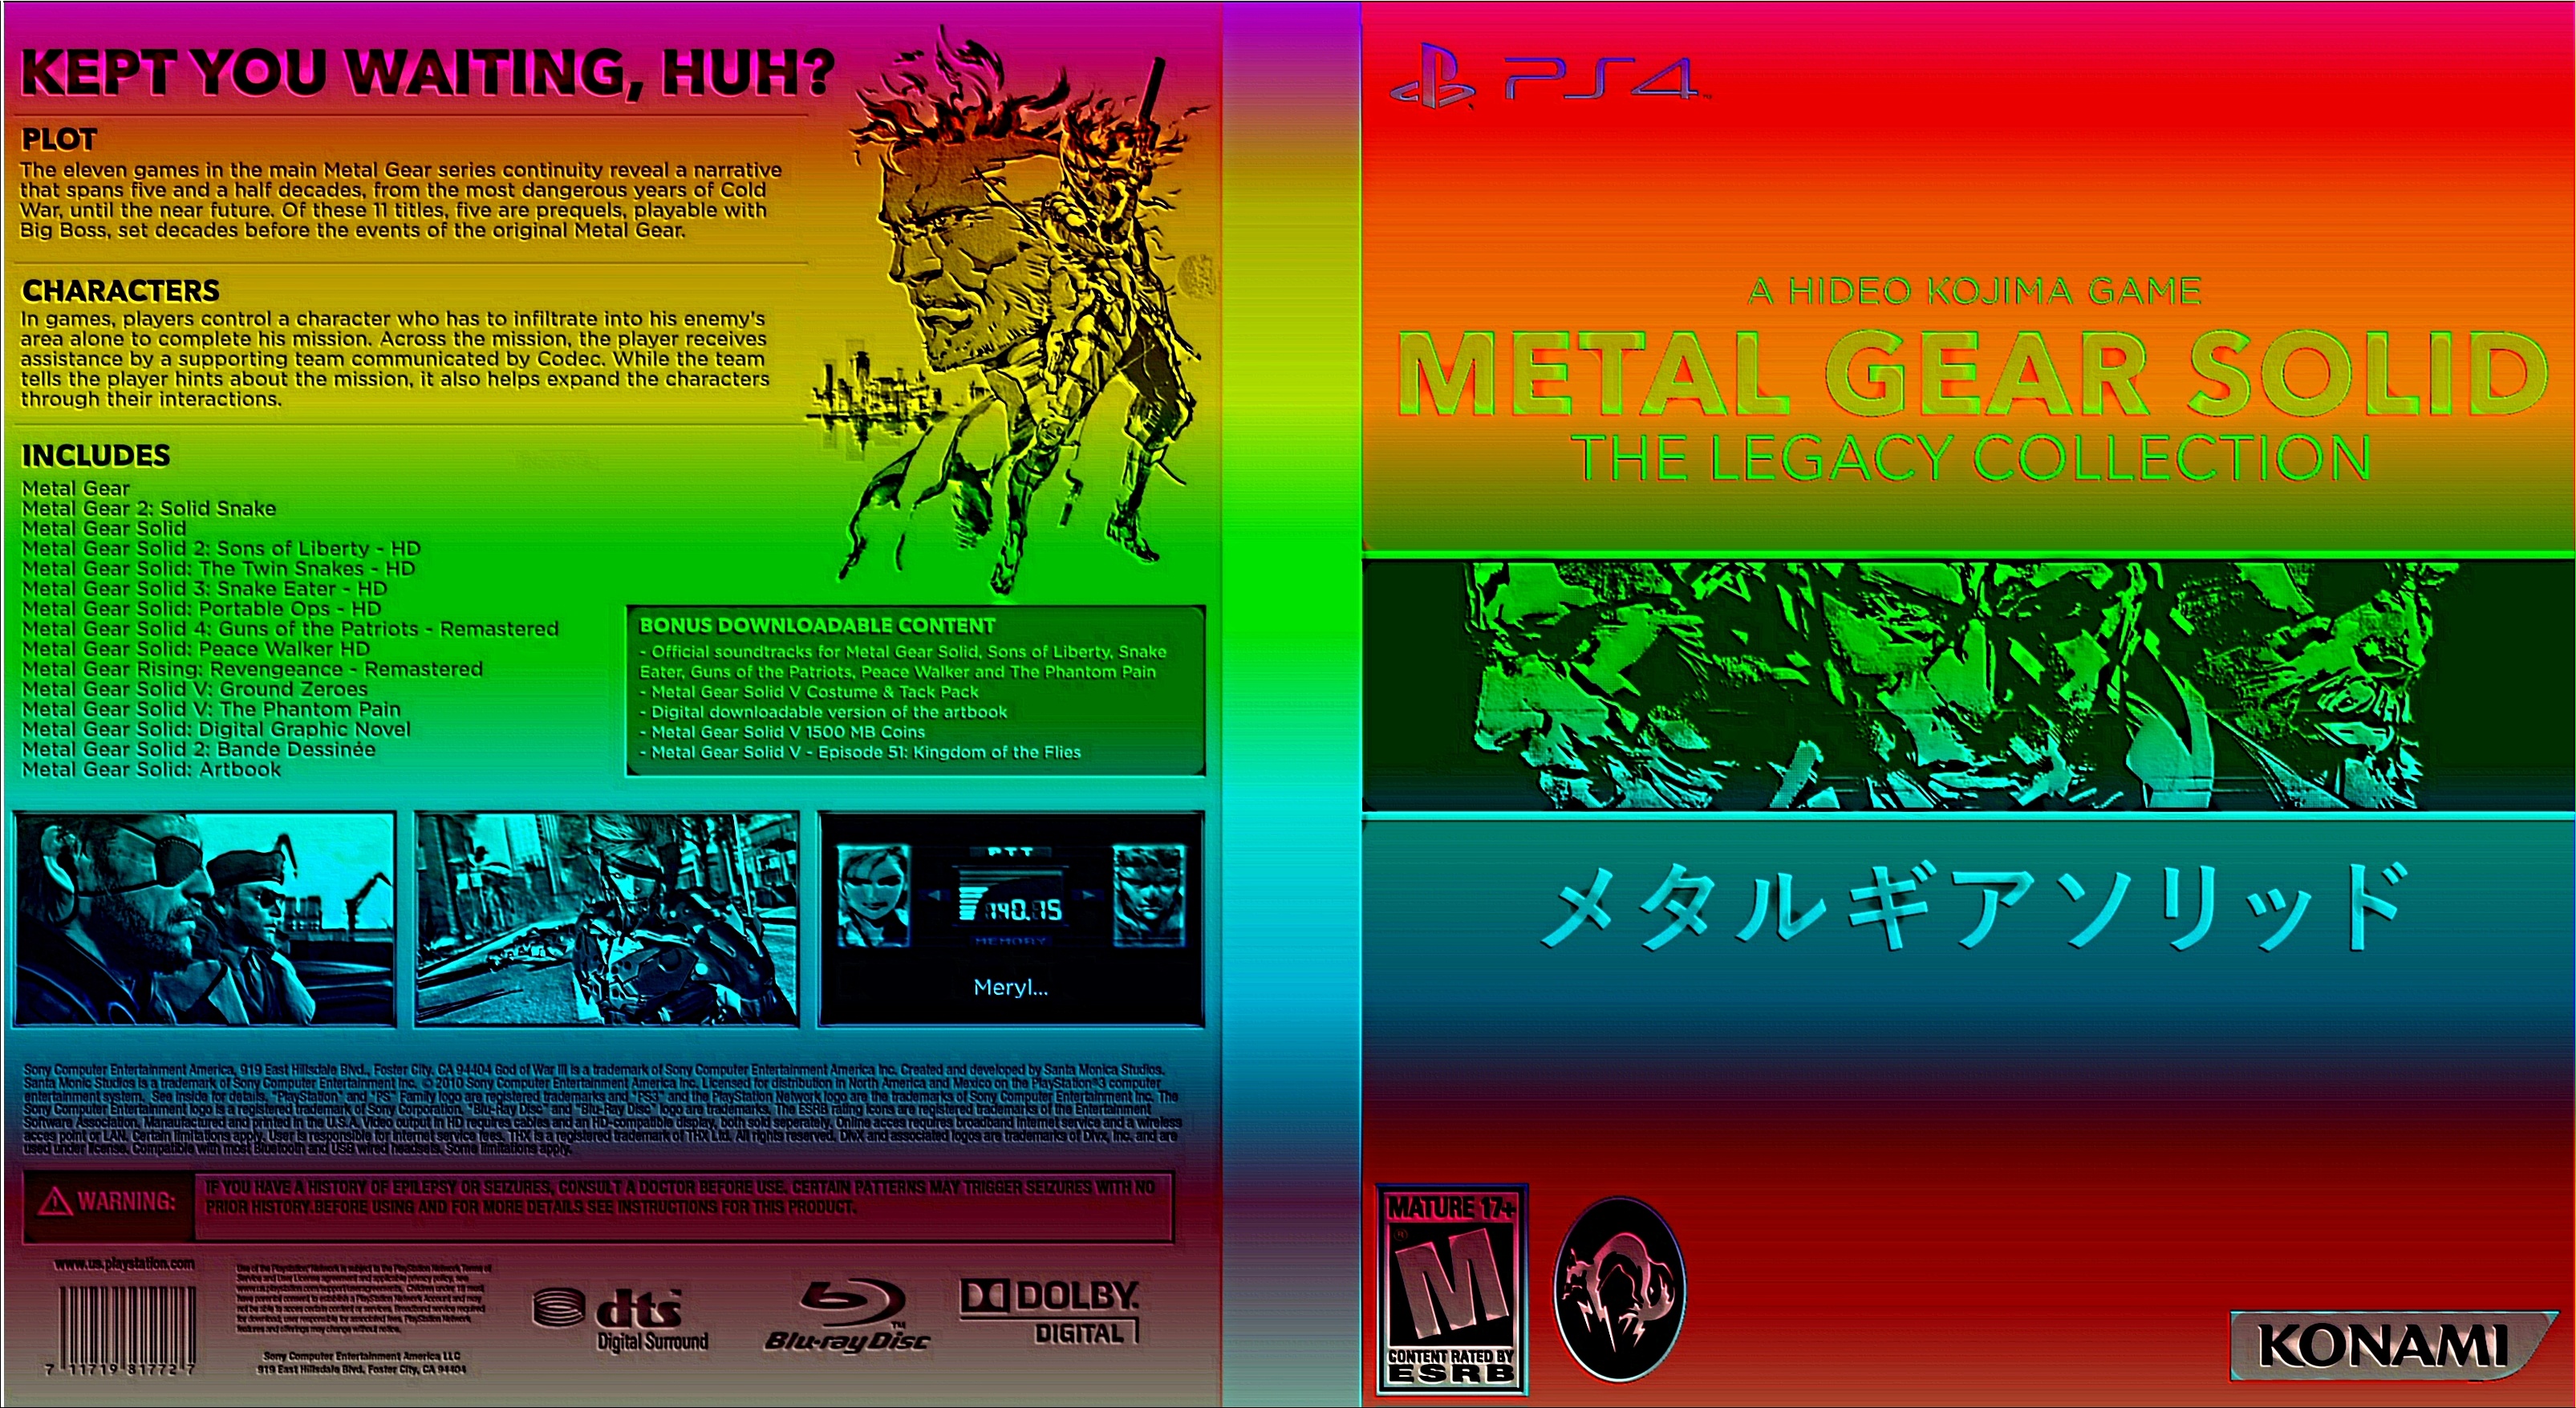 Metal Gear Solid: The Legacy Collection box cover